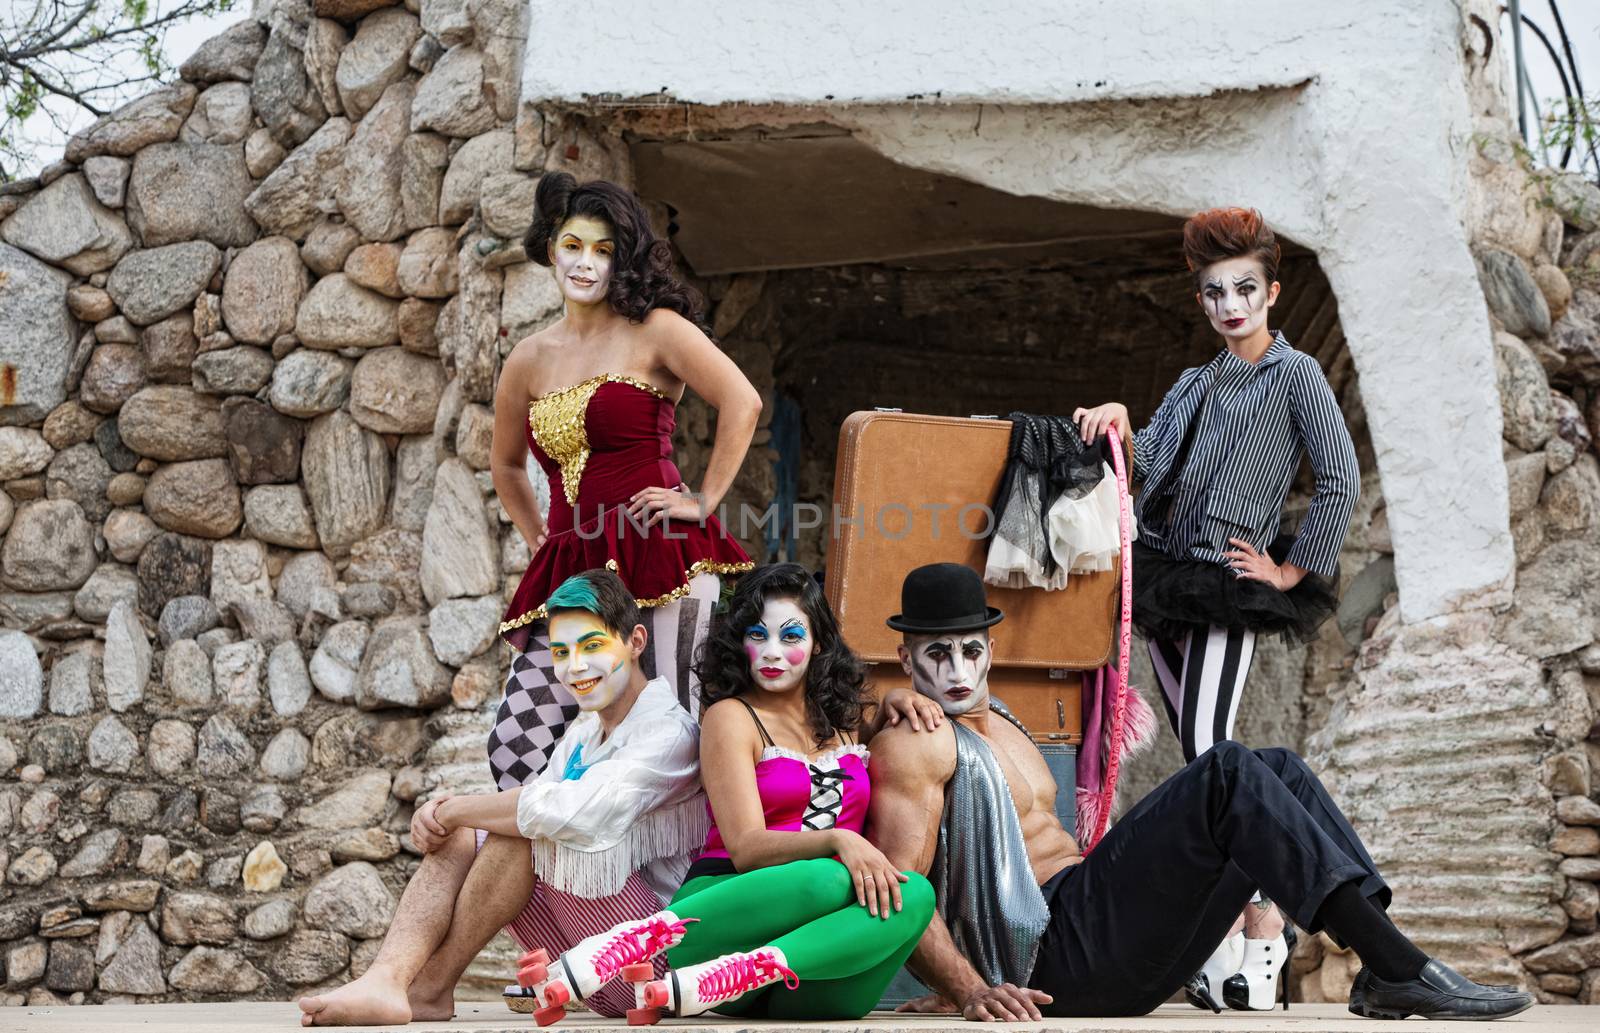 Group of male and female comedia del arte performers sitting on stage